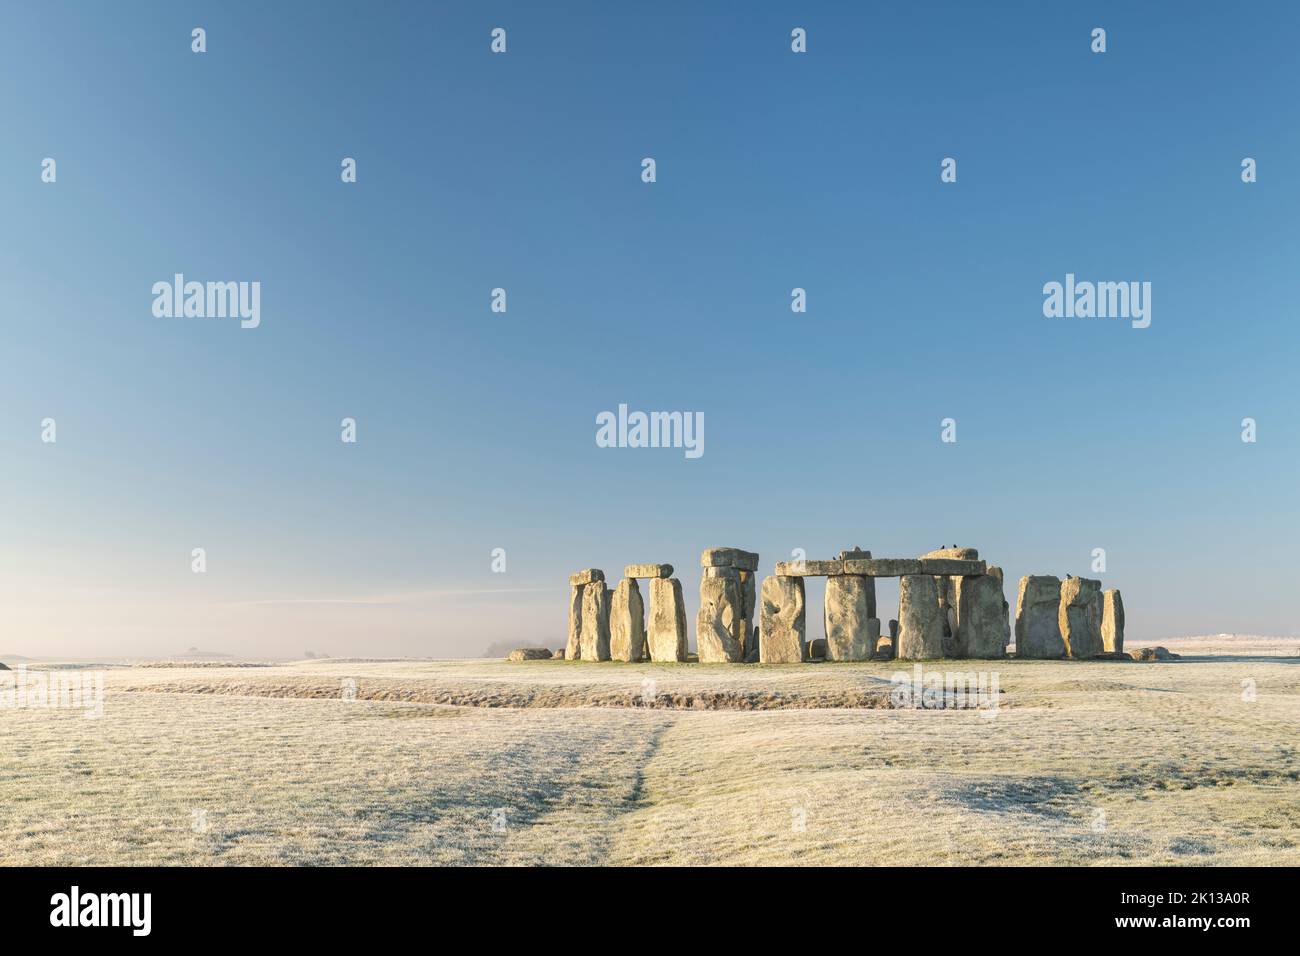 Stonehenge, UNESCO World Heritage Site, at dawn on a chilly frosty winter morning, Wiltshire, England, United Kingdom, Europe Stock Photo